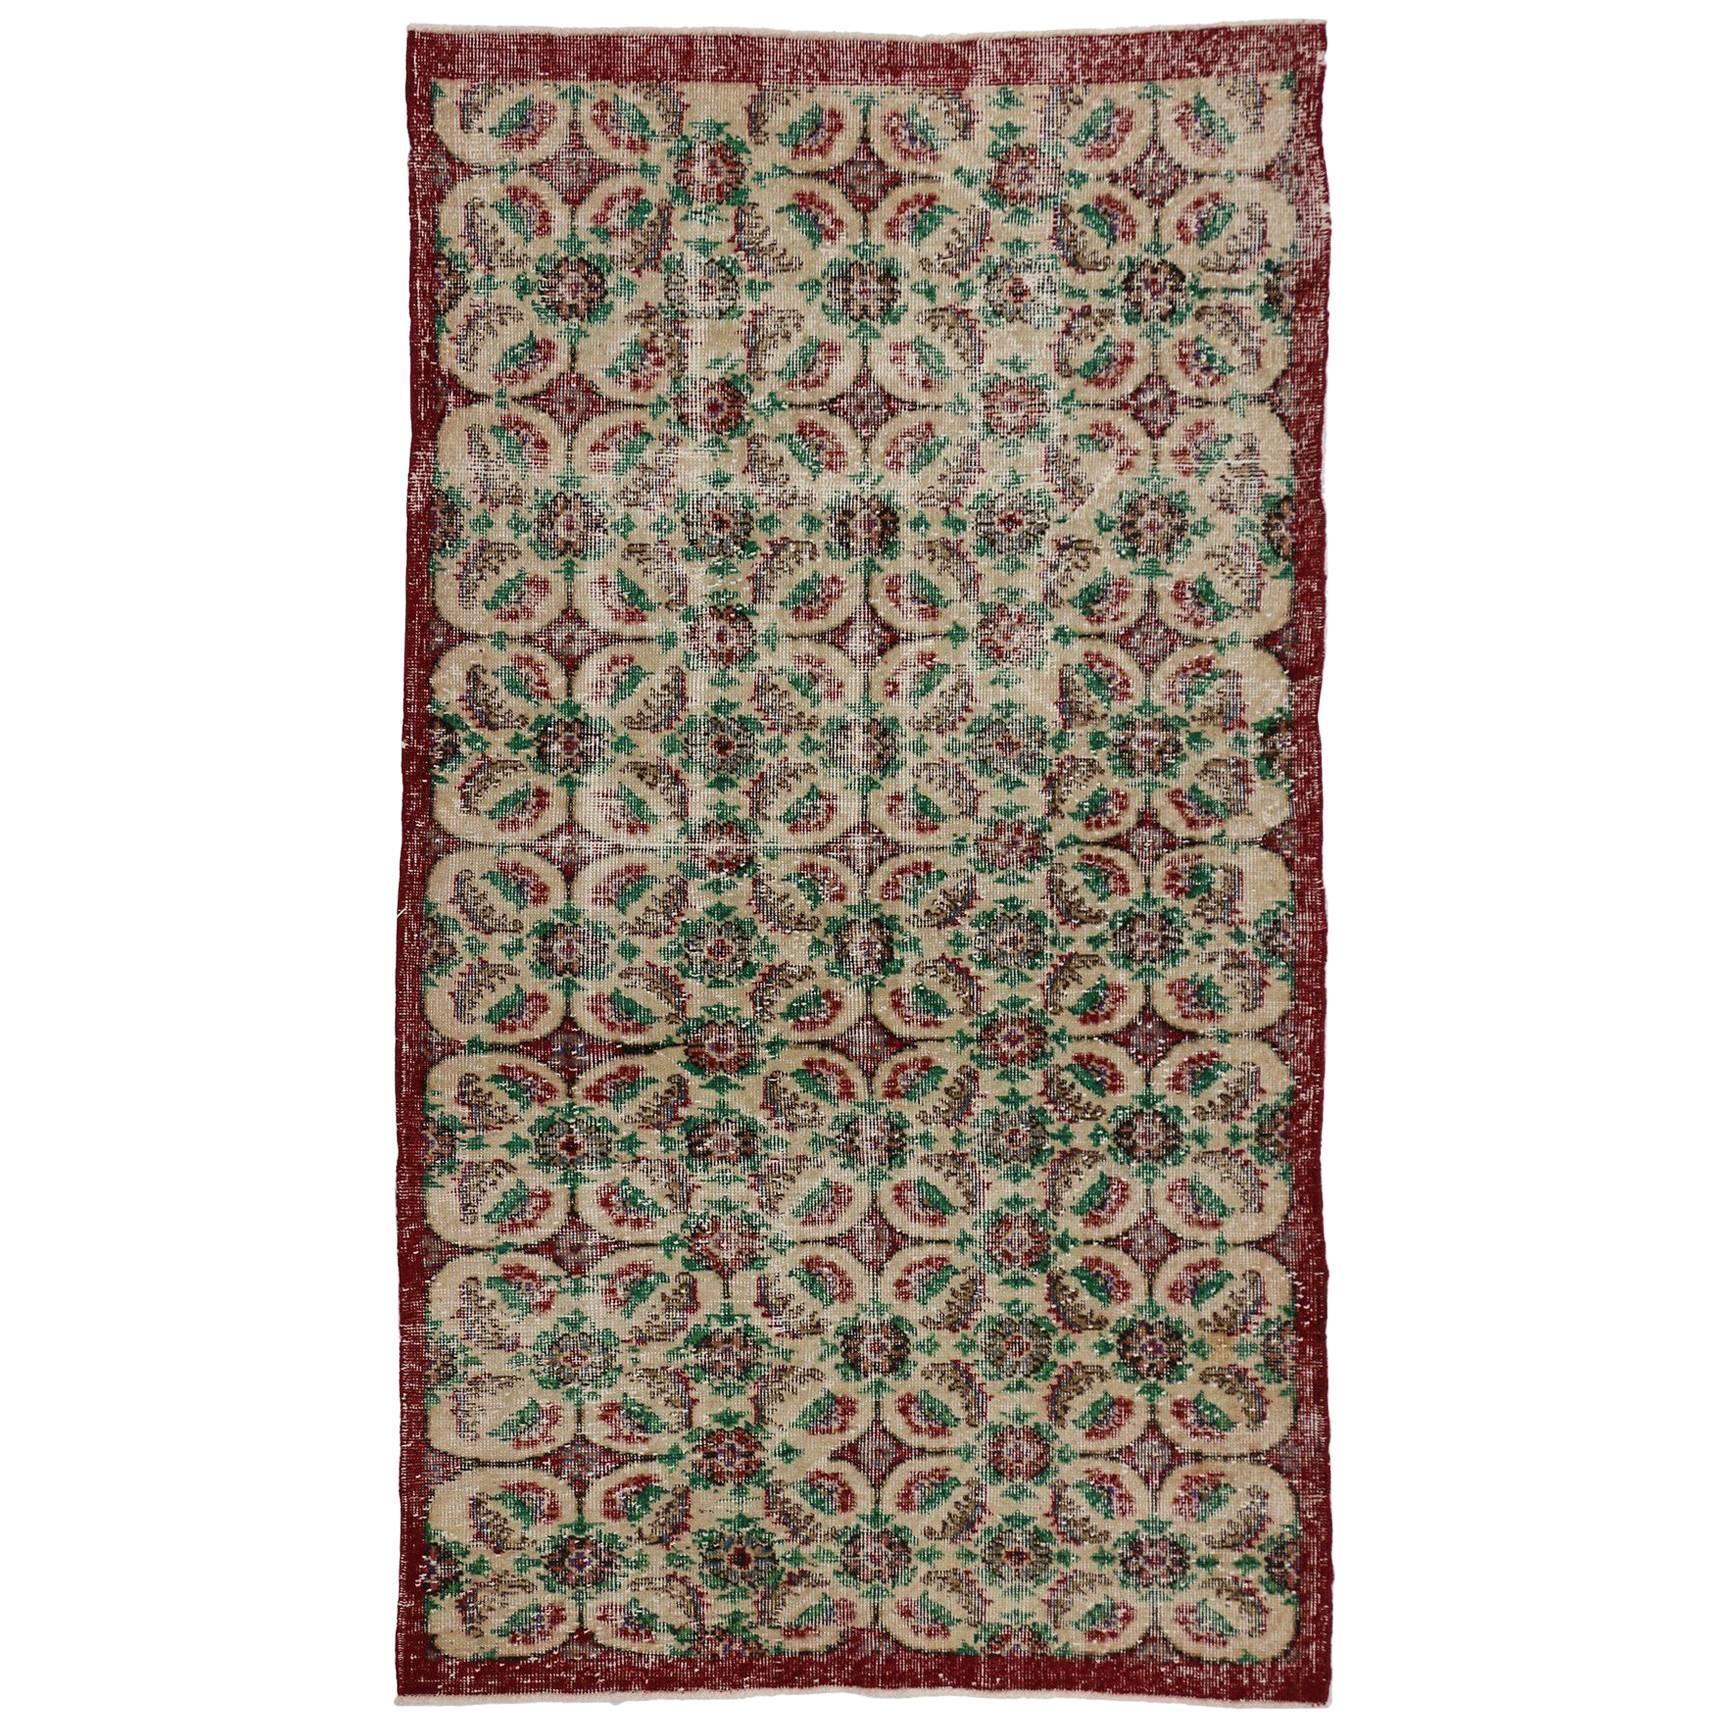 Zeki Muren Vintage Turkish Rug With French Country, Swedish Farmhouse Style For Sale